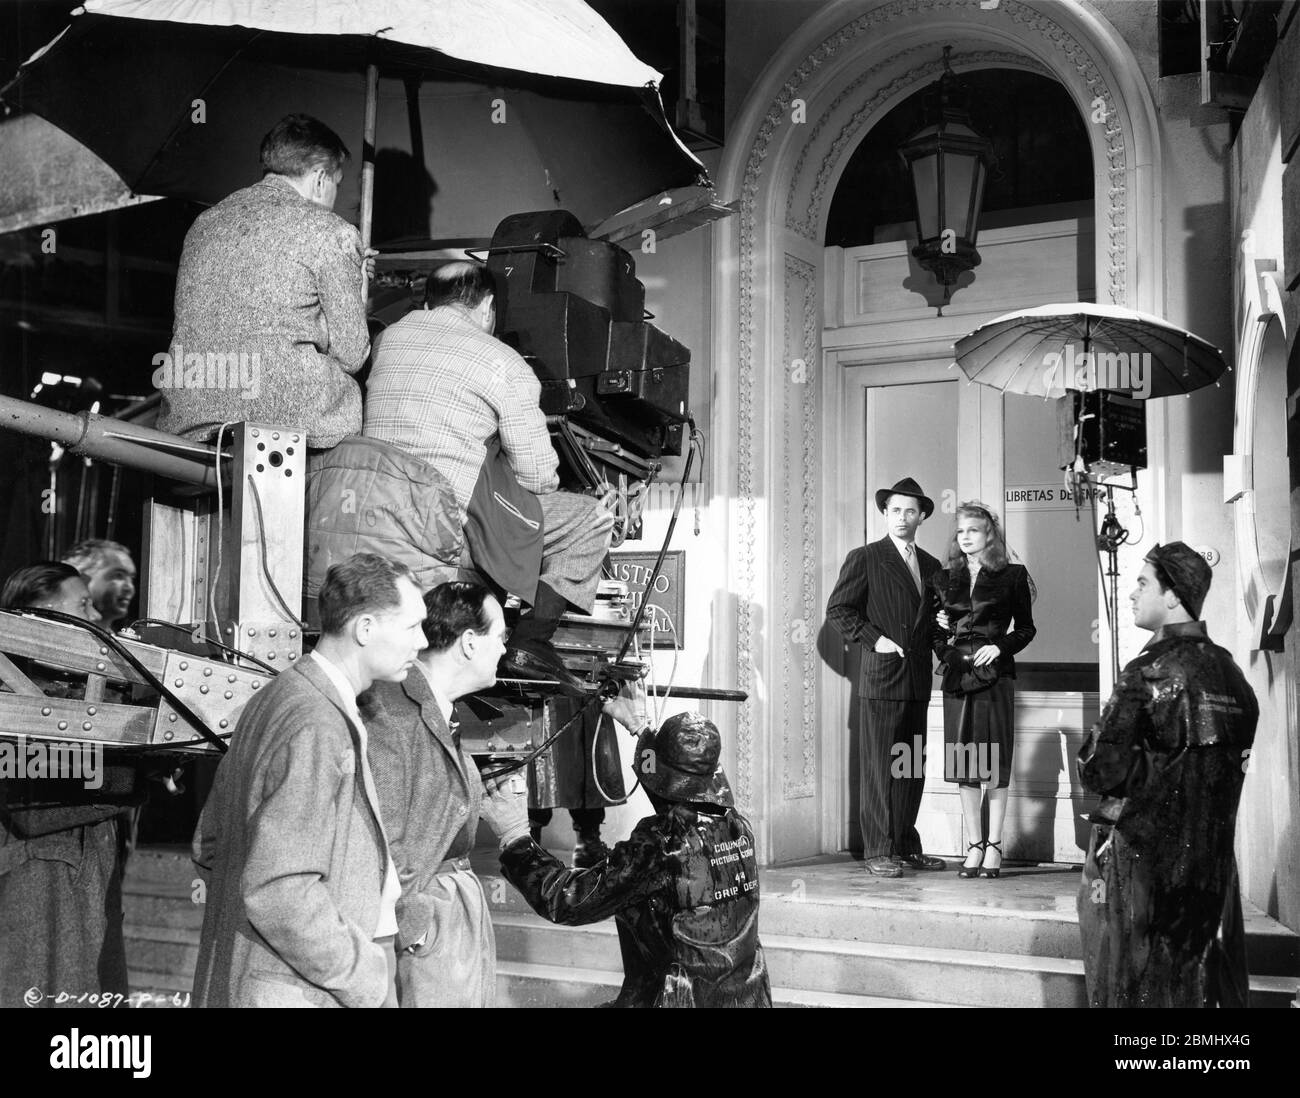 Director CHARLES VIDOR (on camera crane at left) Cinematographer RUDOLPH MATE (second left standing) GLENN FORD and RITA HAYWORTH with Film Crew on set candid filming GILDA 1946 director CHARLES VIDOR gowns JEAN LOUIS producer VIRGINIA VAN UPP Columbia Pictures Corporation Stock Photo